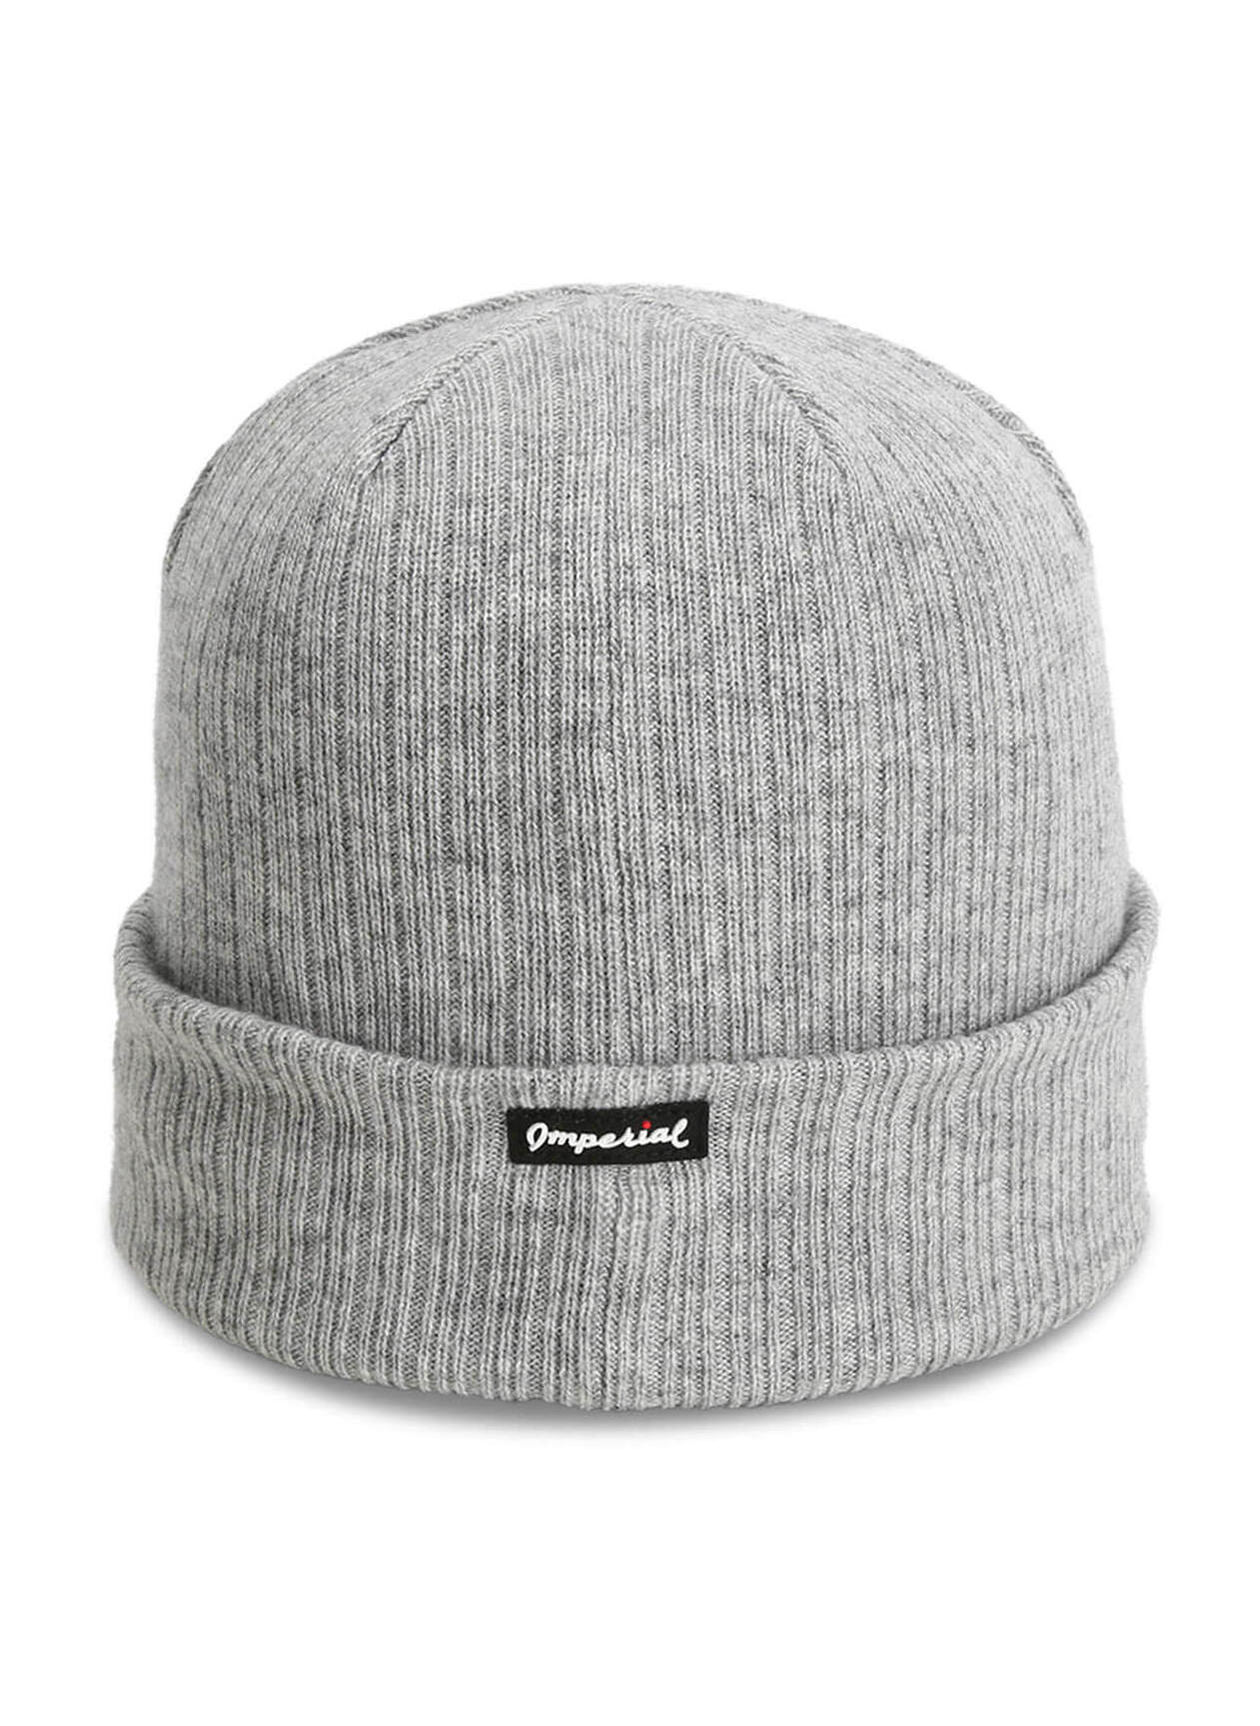 Imperial Fog The Edelweiss Cashmere and Wool Knit Beanie